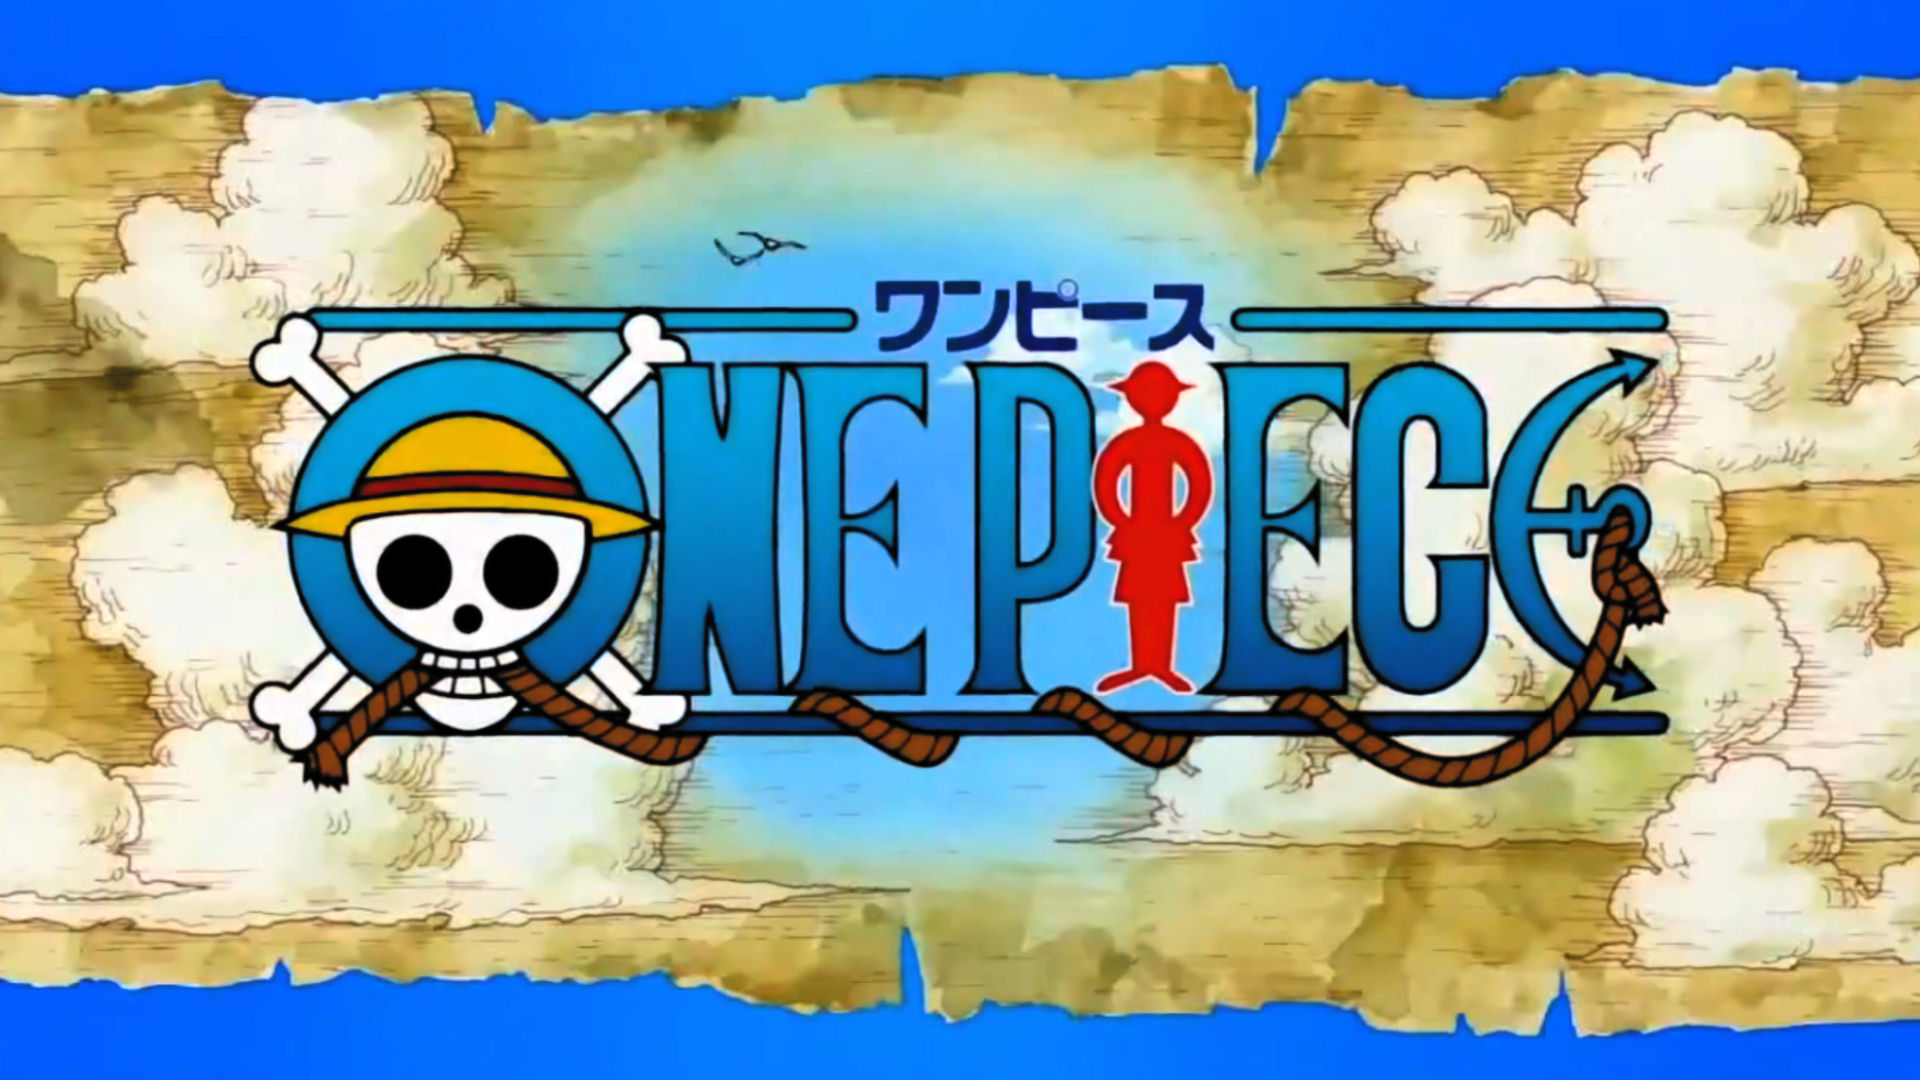 48 One Piece Android Wallpaper On Wallpapersafari